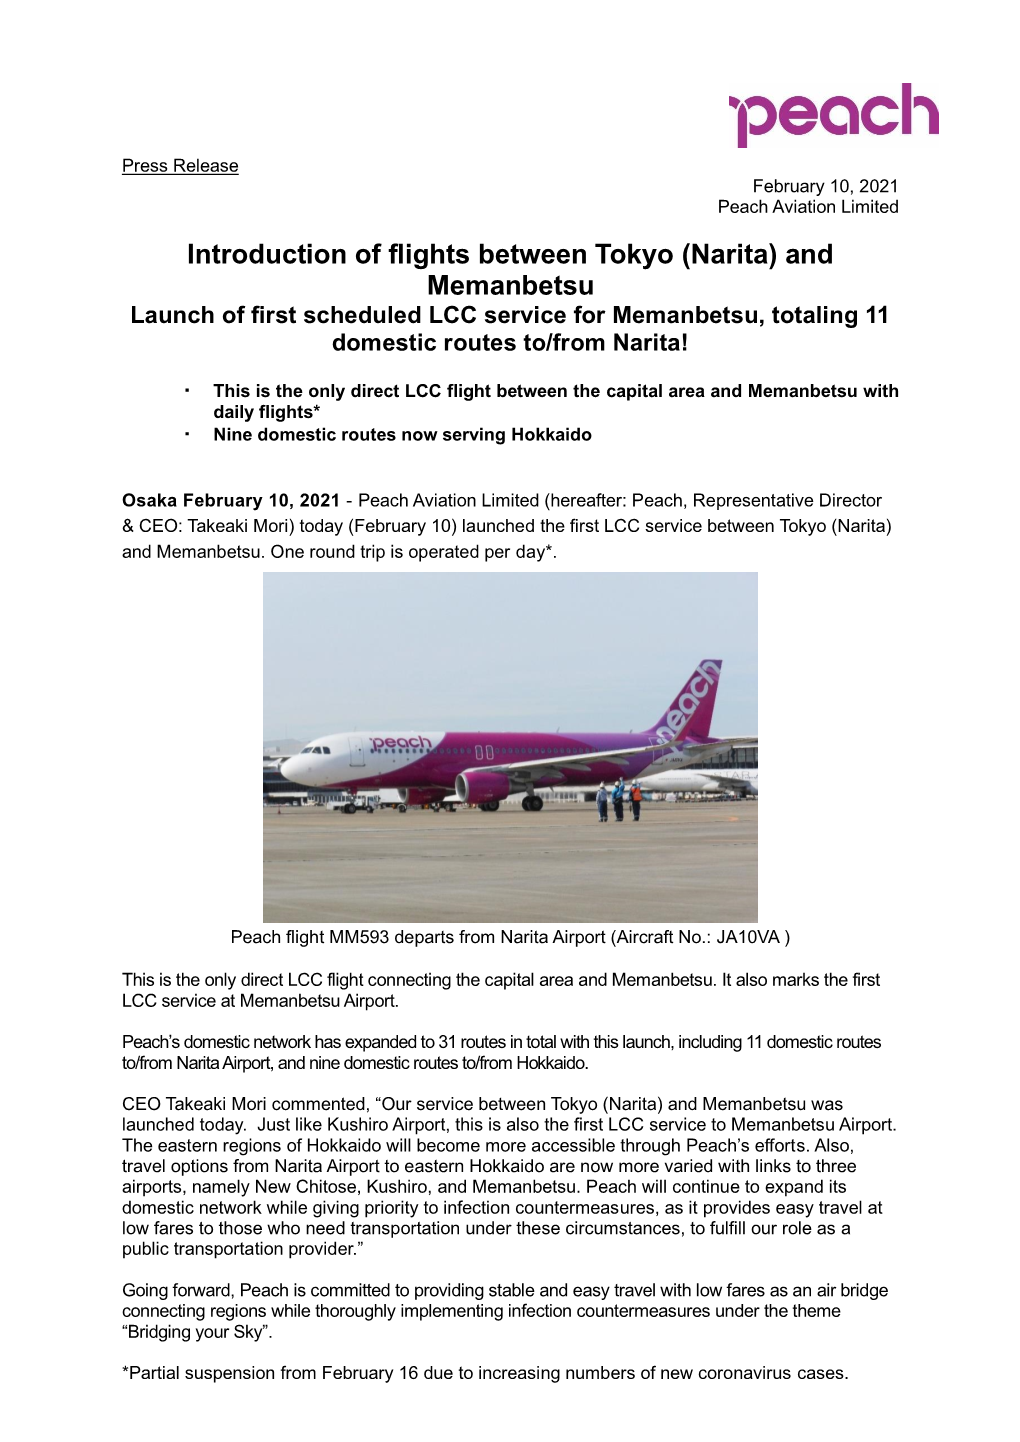 Introduction of Flights Between Tokyo (Narita) and Memanbetsu Launch of First Scheduled LCC Service for Memanbetsu, Totaling 11 Domestic Routes To/From Narita!